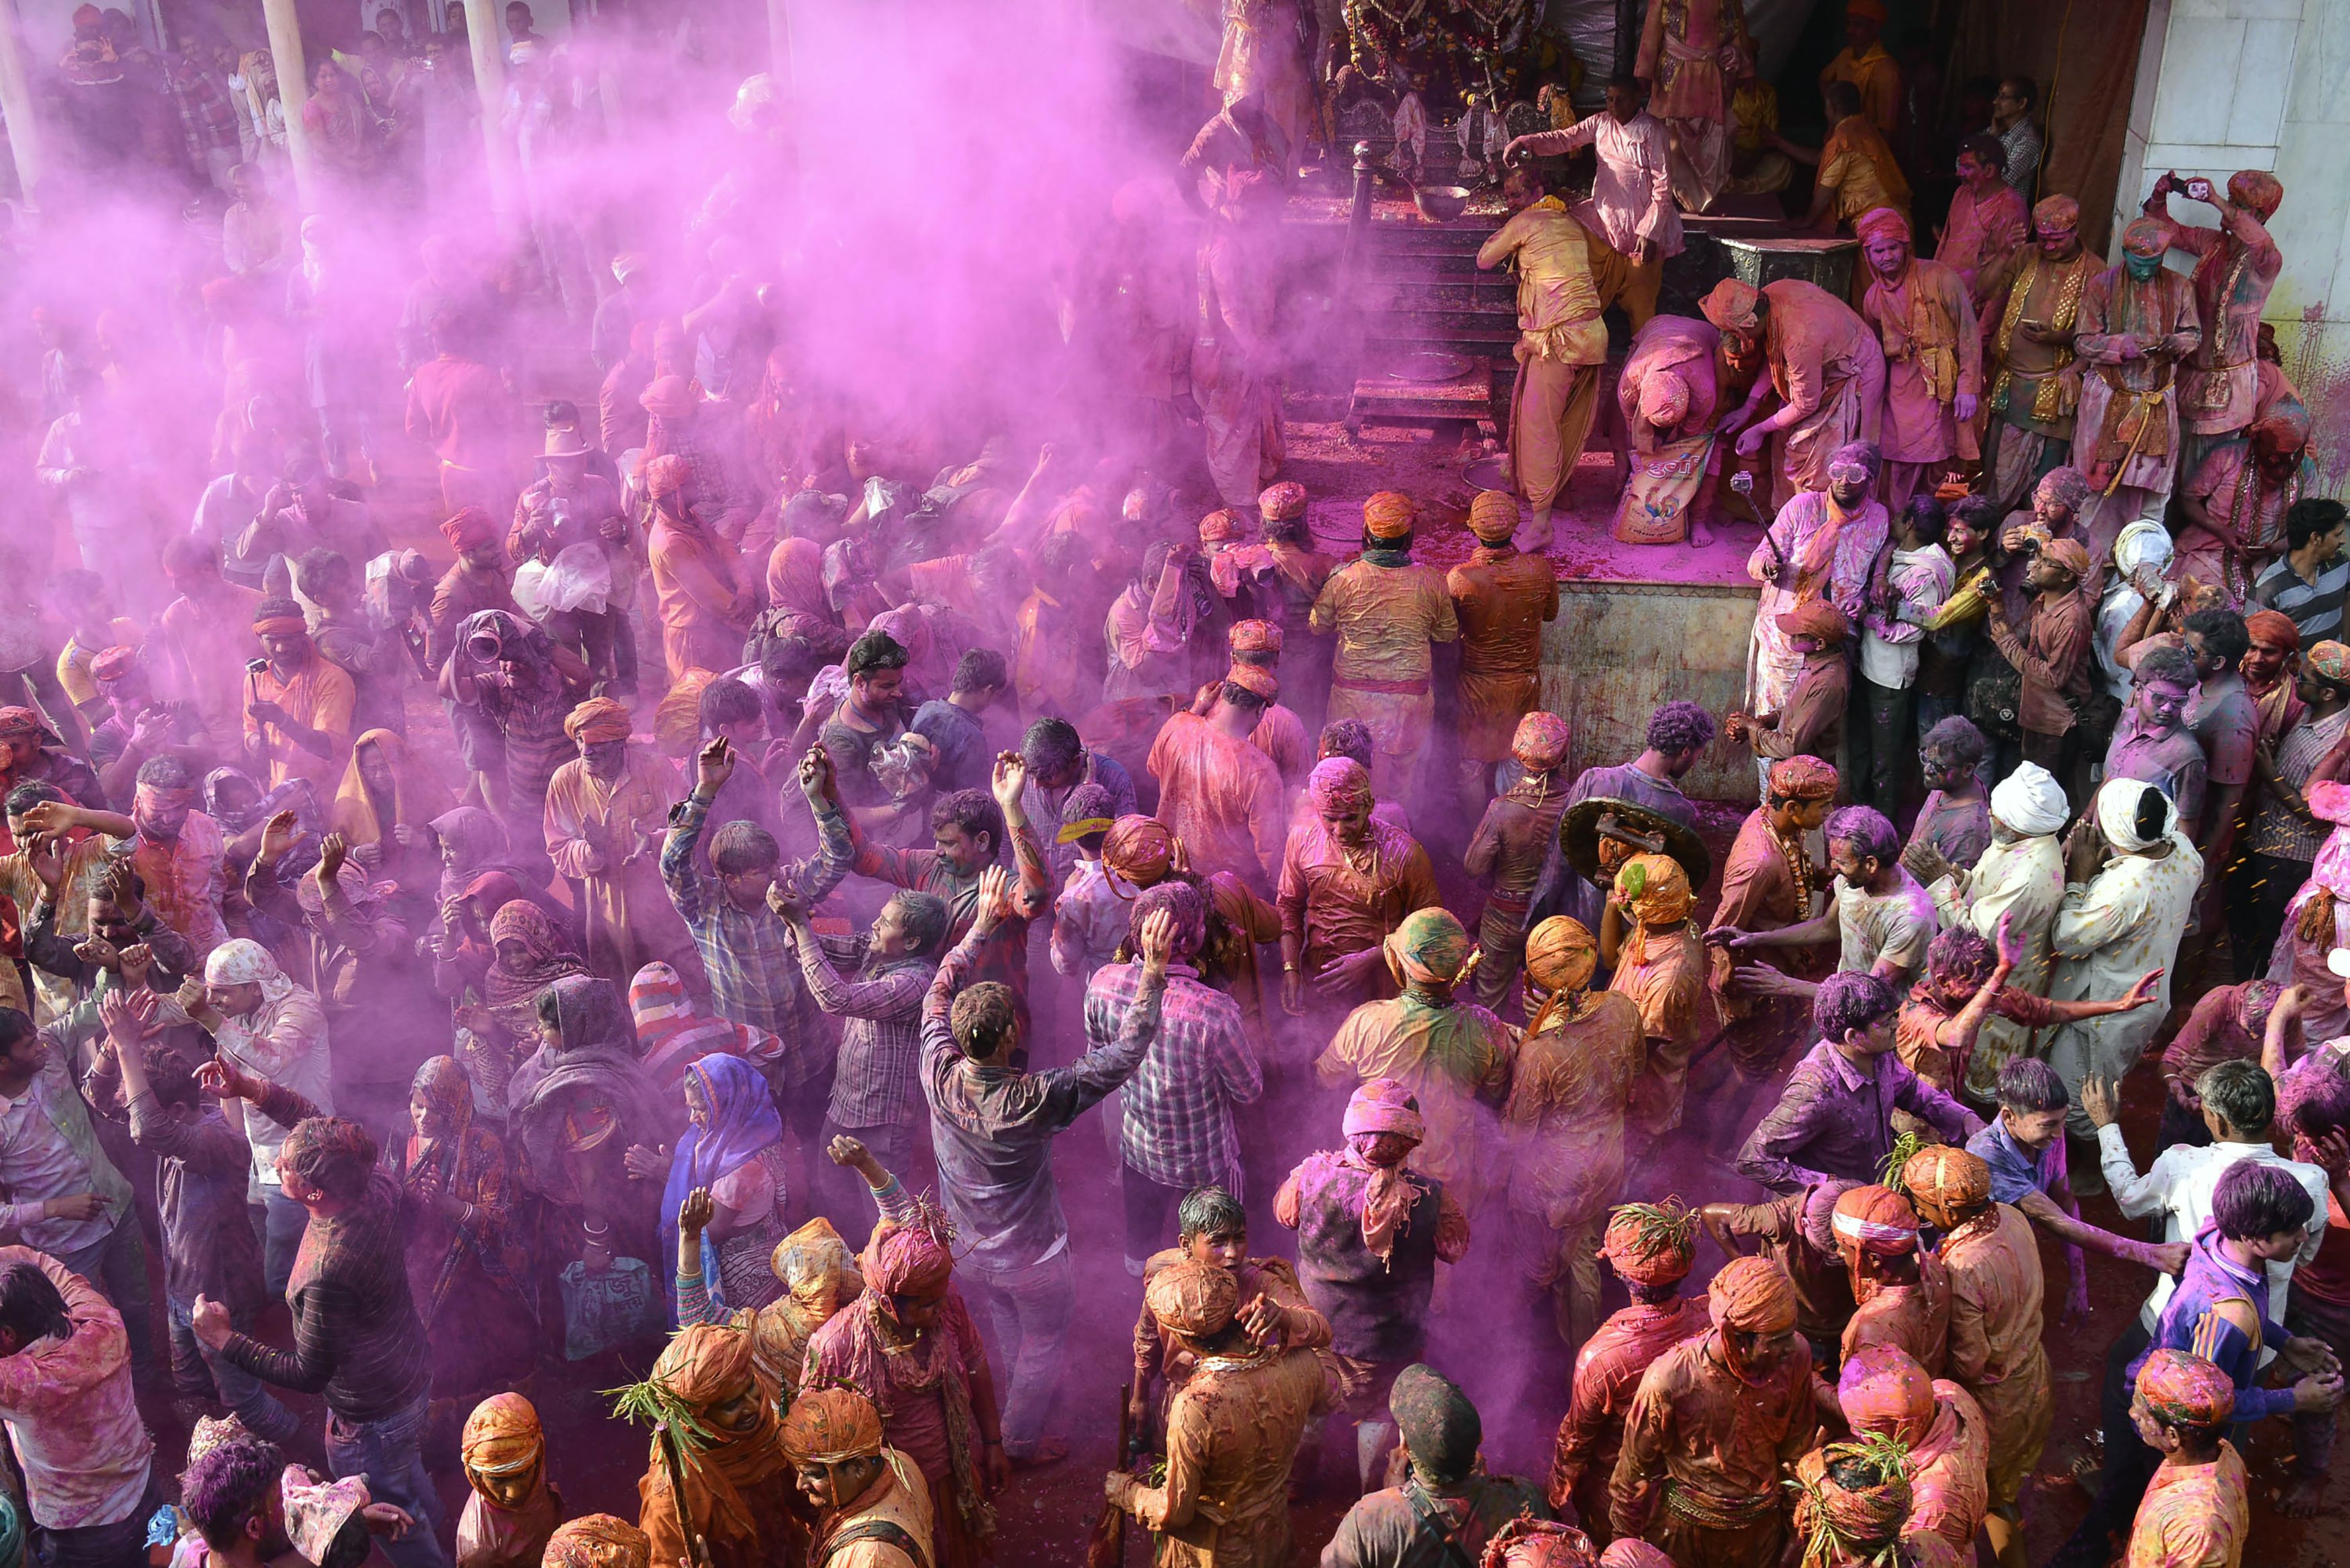 Indian Hindu devotees celebrate Holi, the spring festival of colours, during a traditional gathering at Nandgaon village in Uttar Pradesh state on March 7, 2017. (AFP/Getty Images)